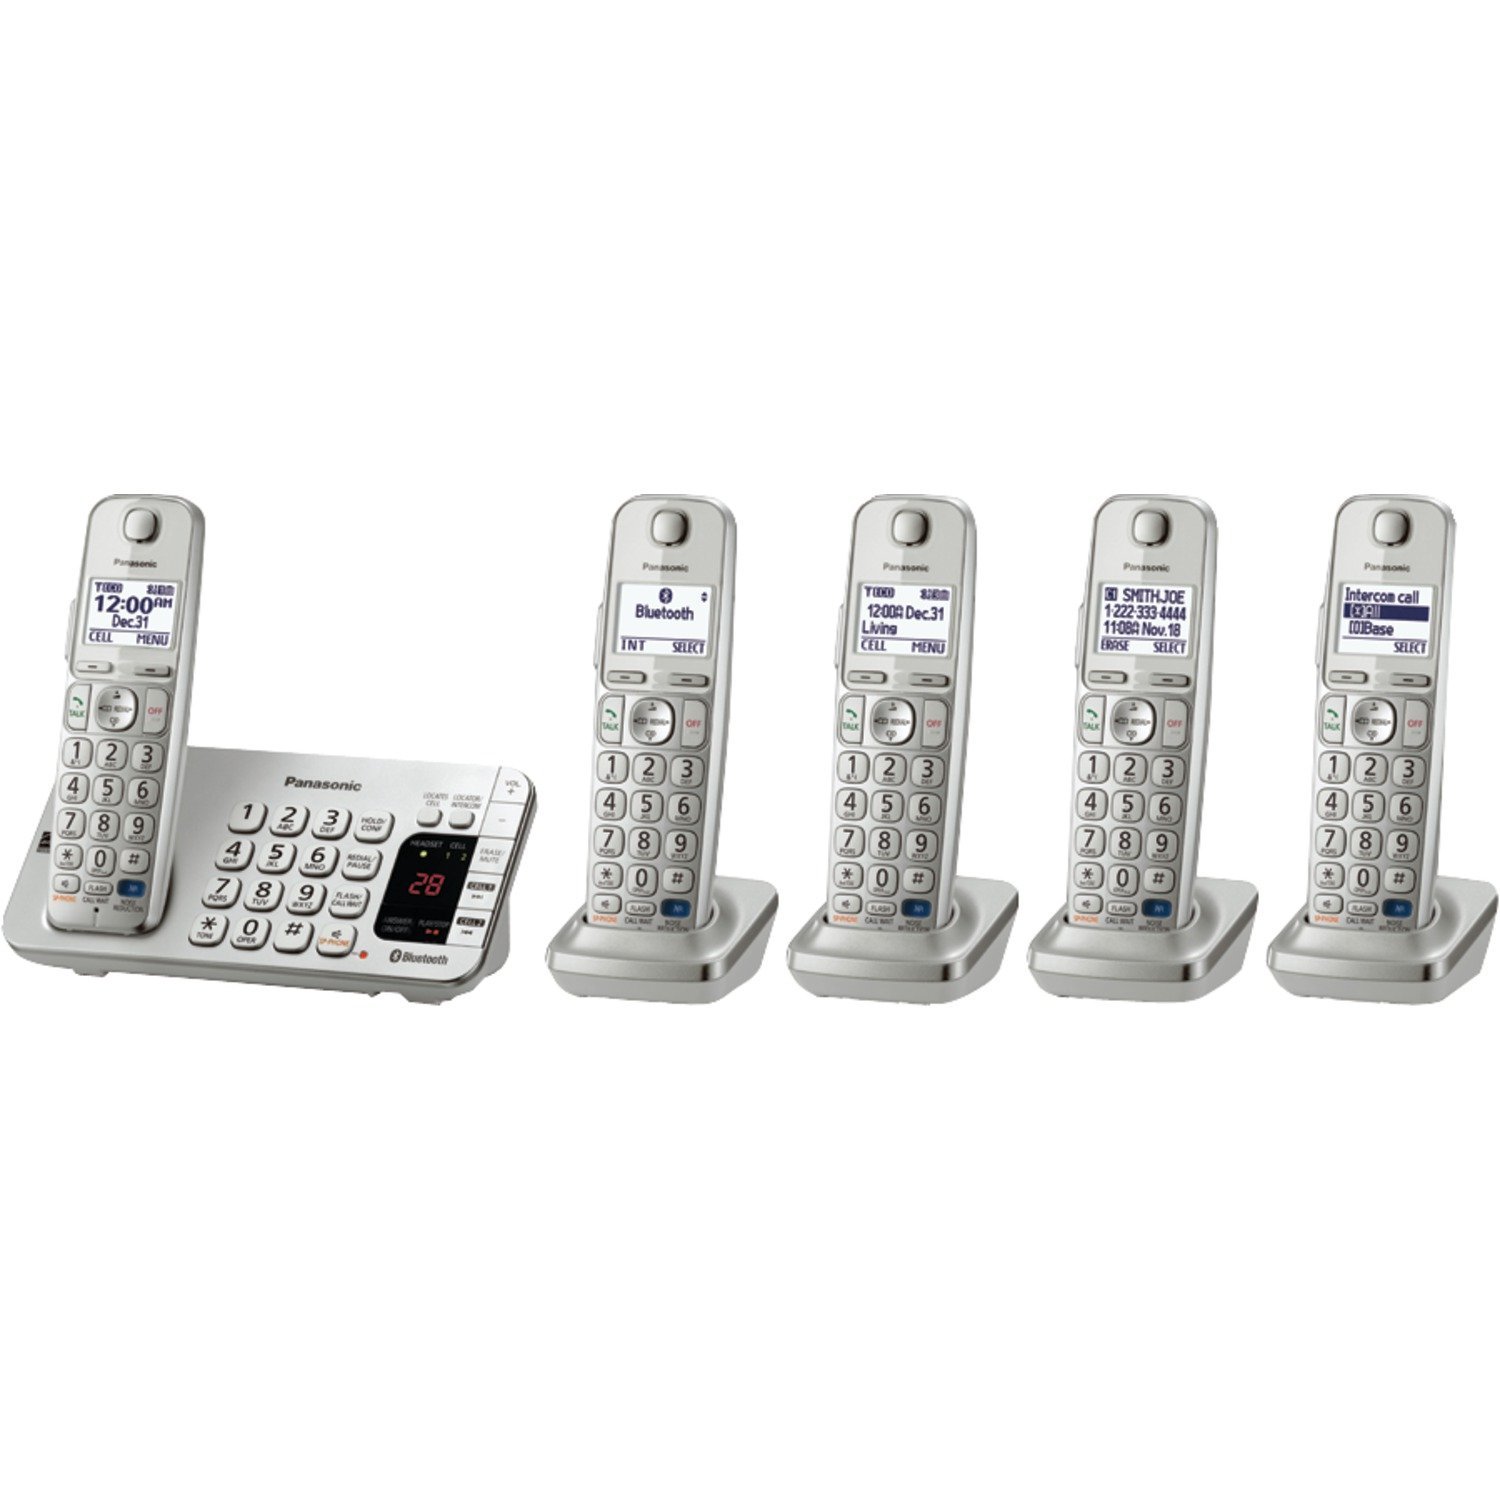 Panasonic KX-TGE275S 5-Cordless Handsets Link2Cell Bluetooth Corldess Phone with Answering Machine, Silver